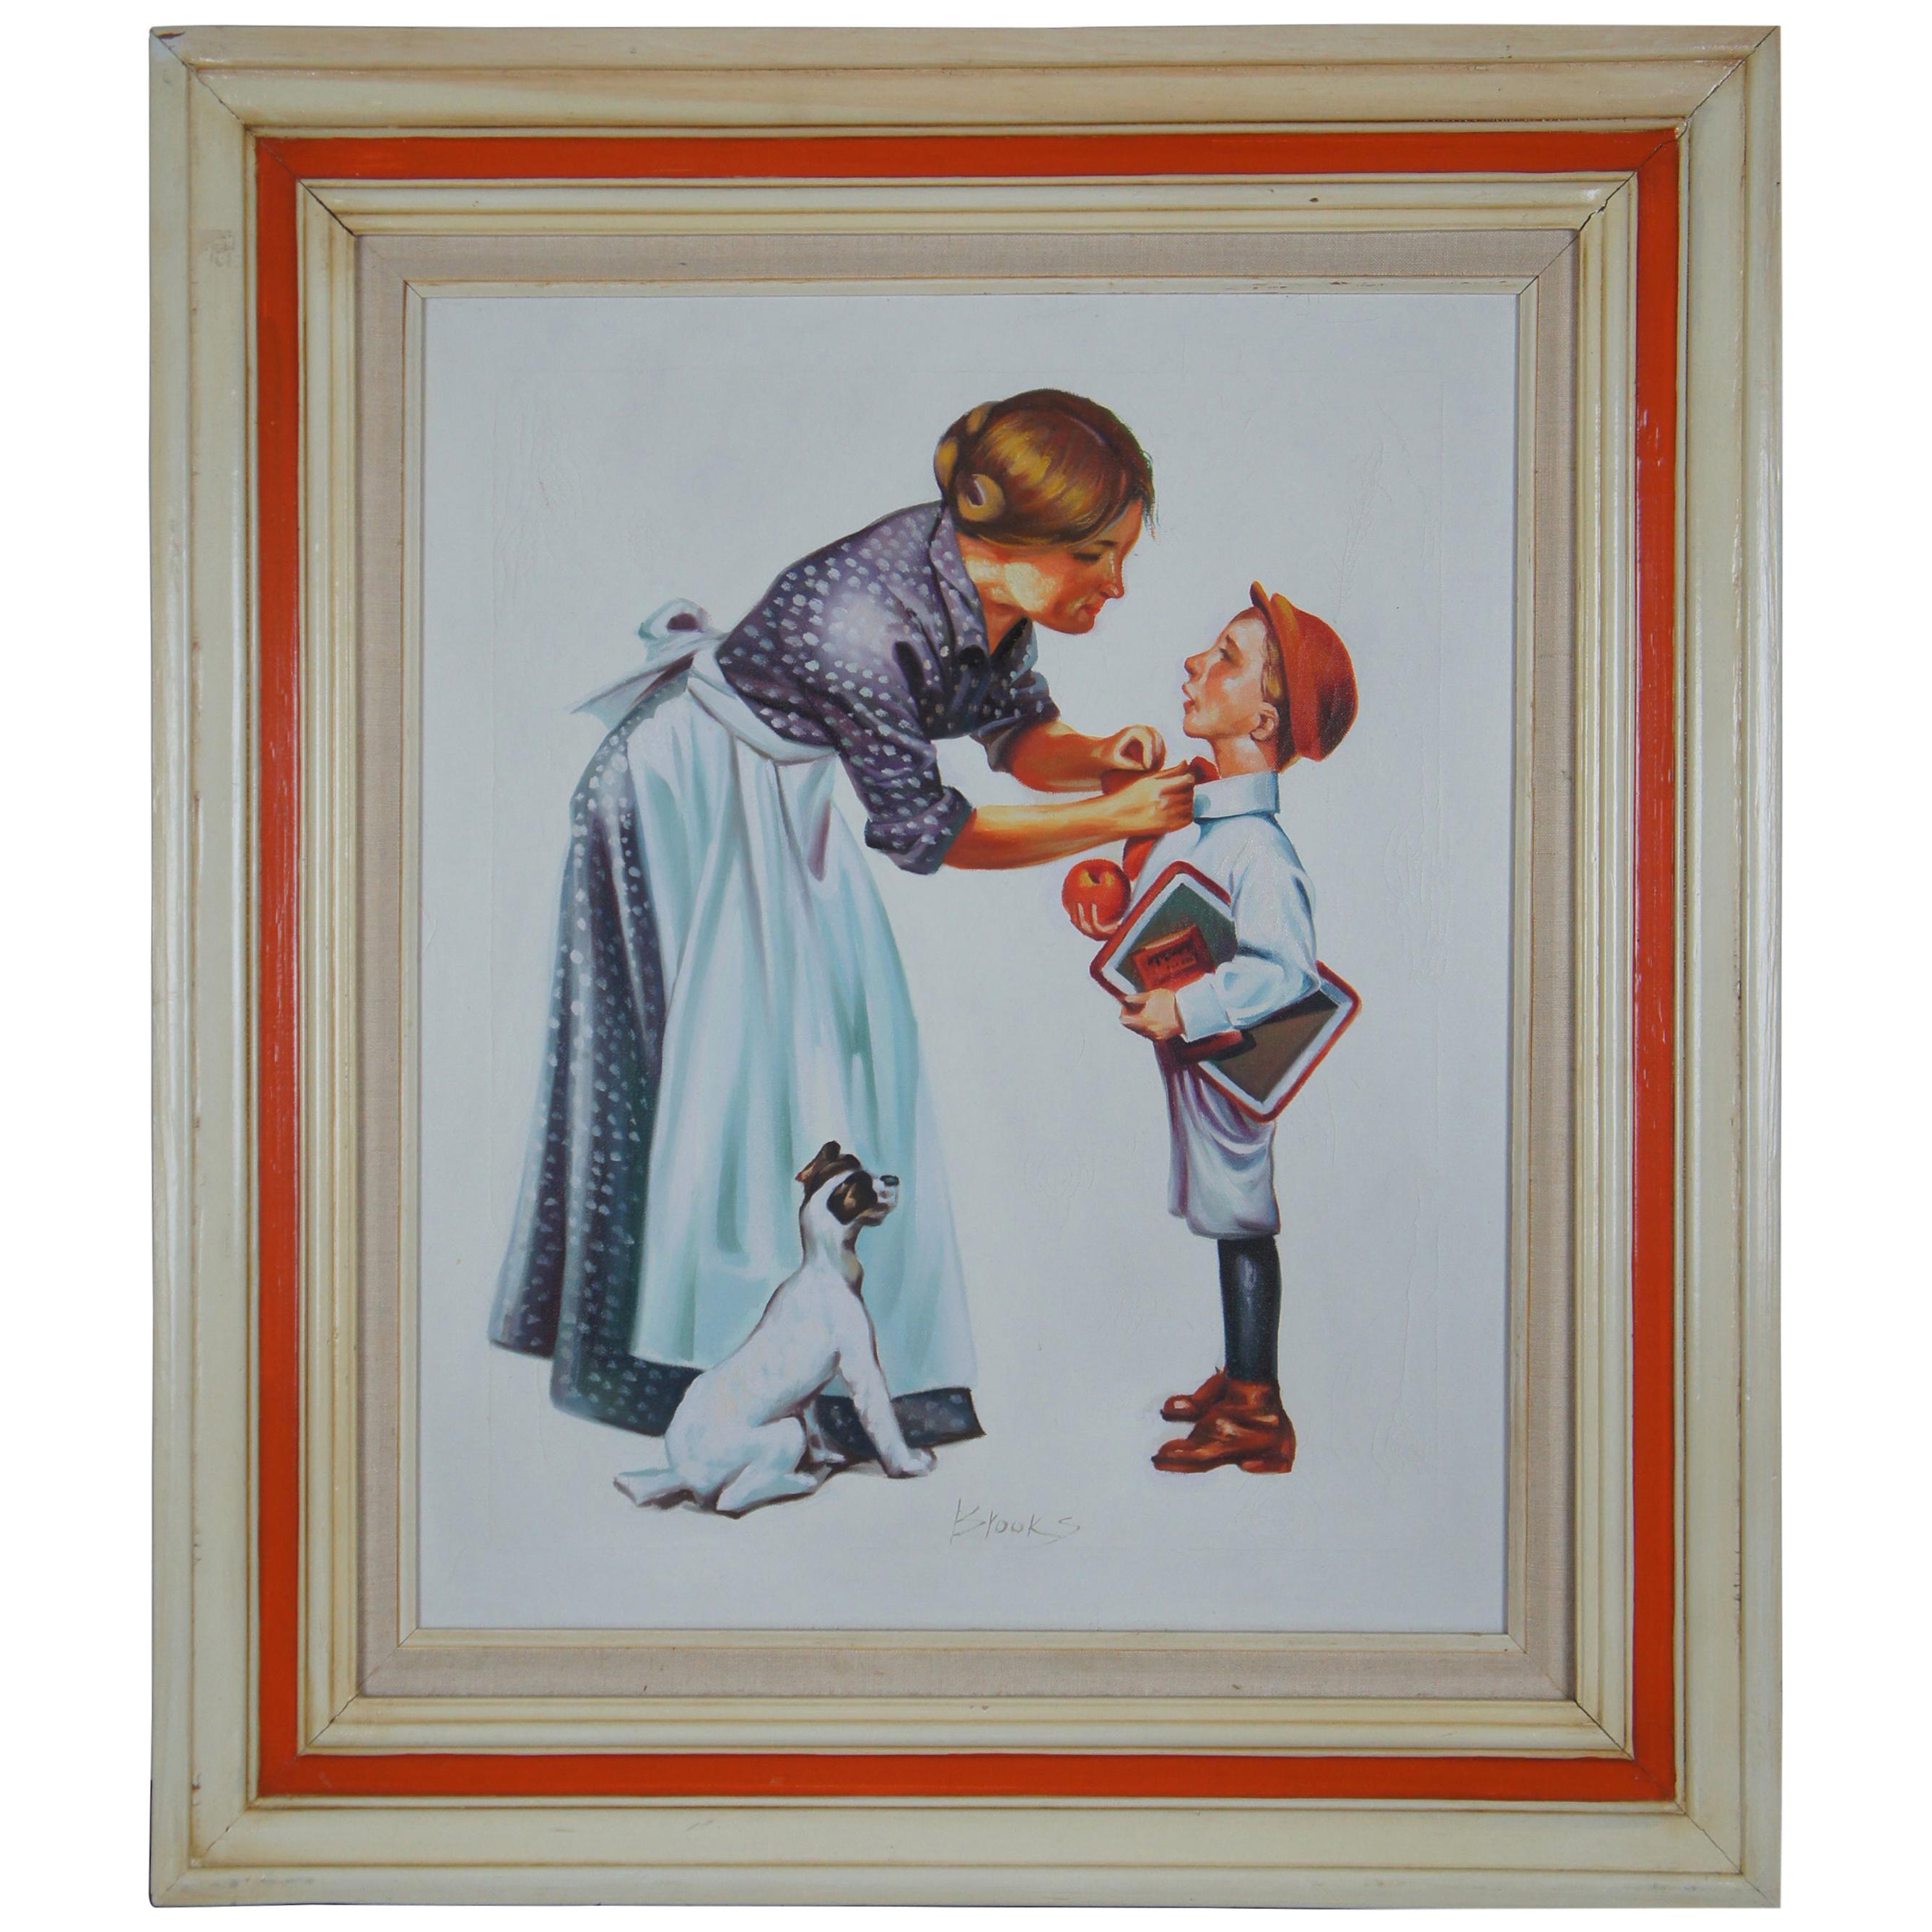 First Day of School Realist Illustration Oil Painting Canvas by Brooks, 1950s For Sale